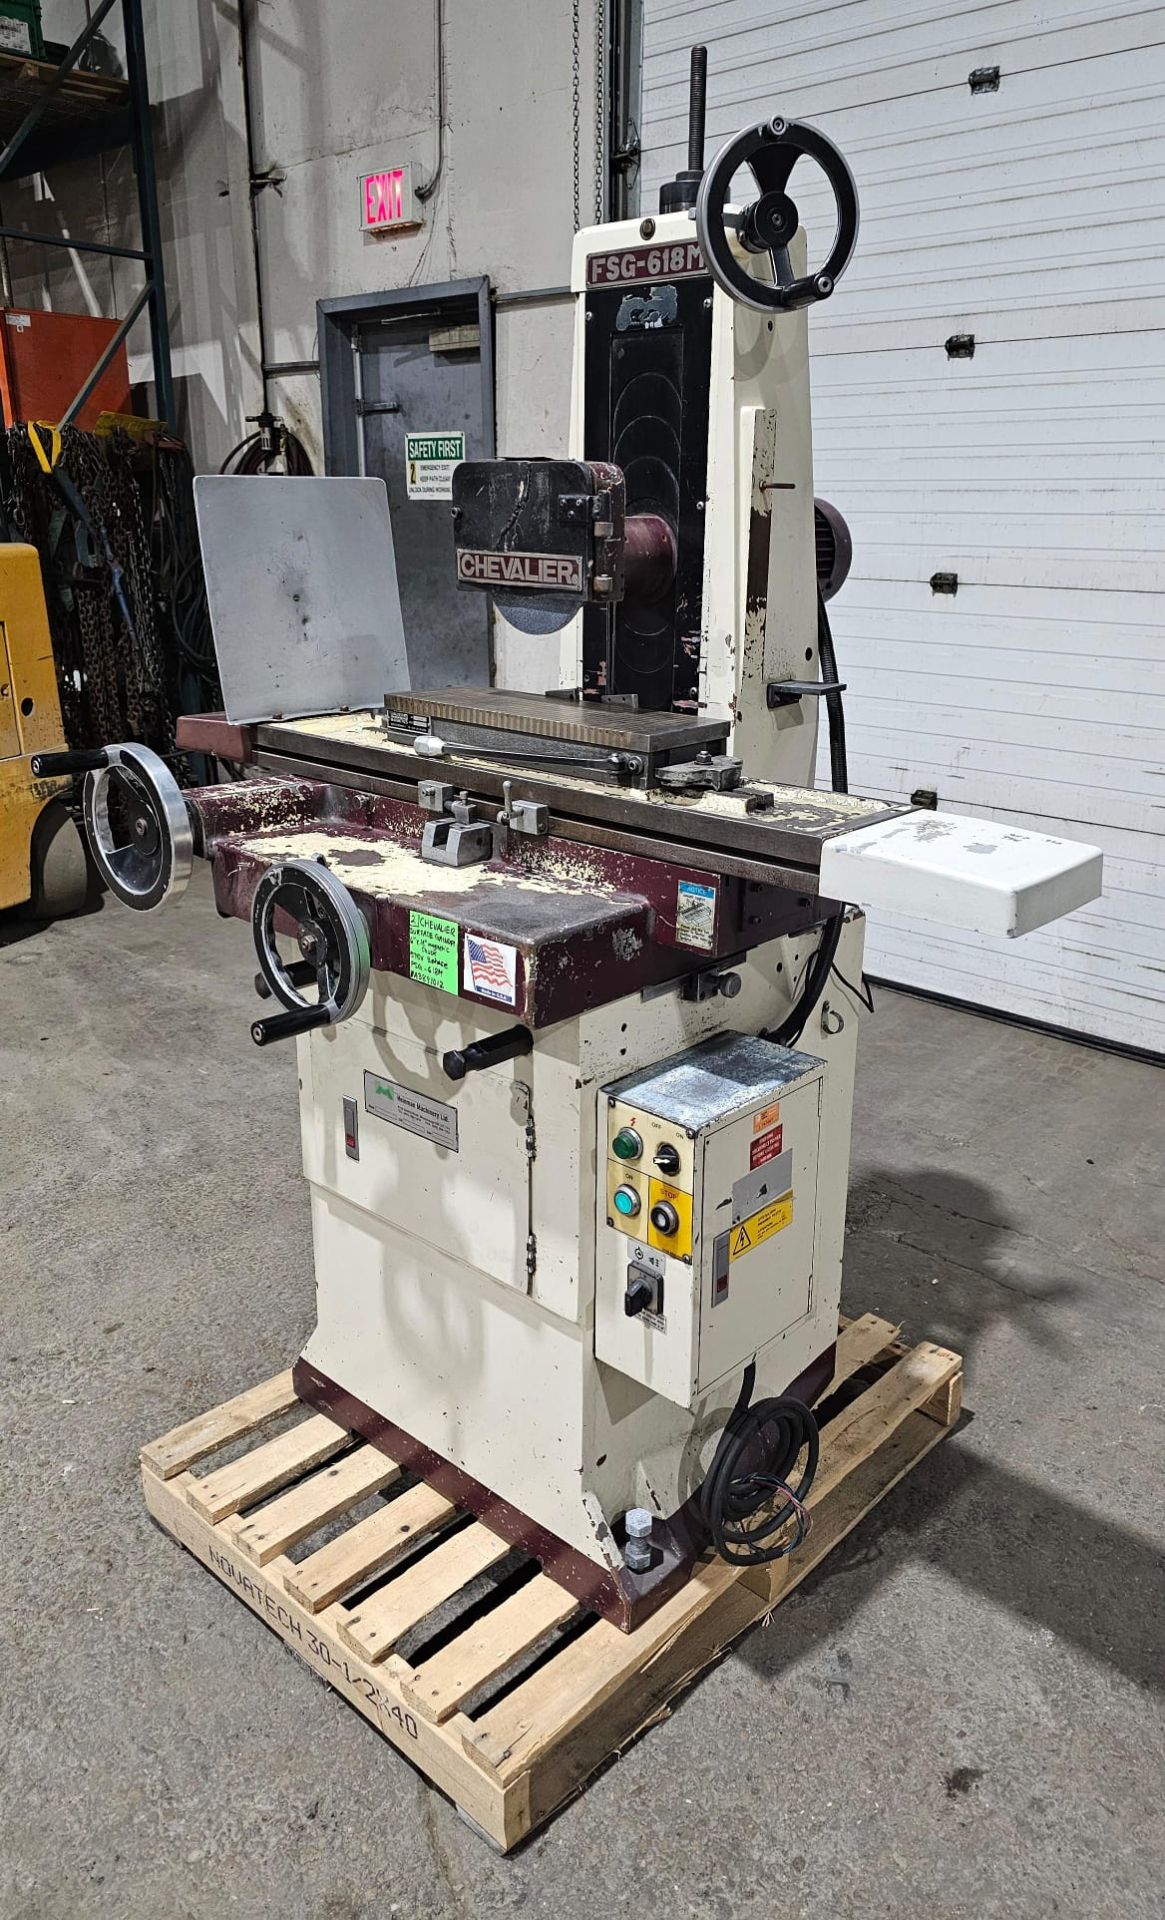 CHEVALIER Hydraulic Surface Grinder 18" x 6" Magnetic Chuck model: FSG-618M serial: a3891012 575v